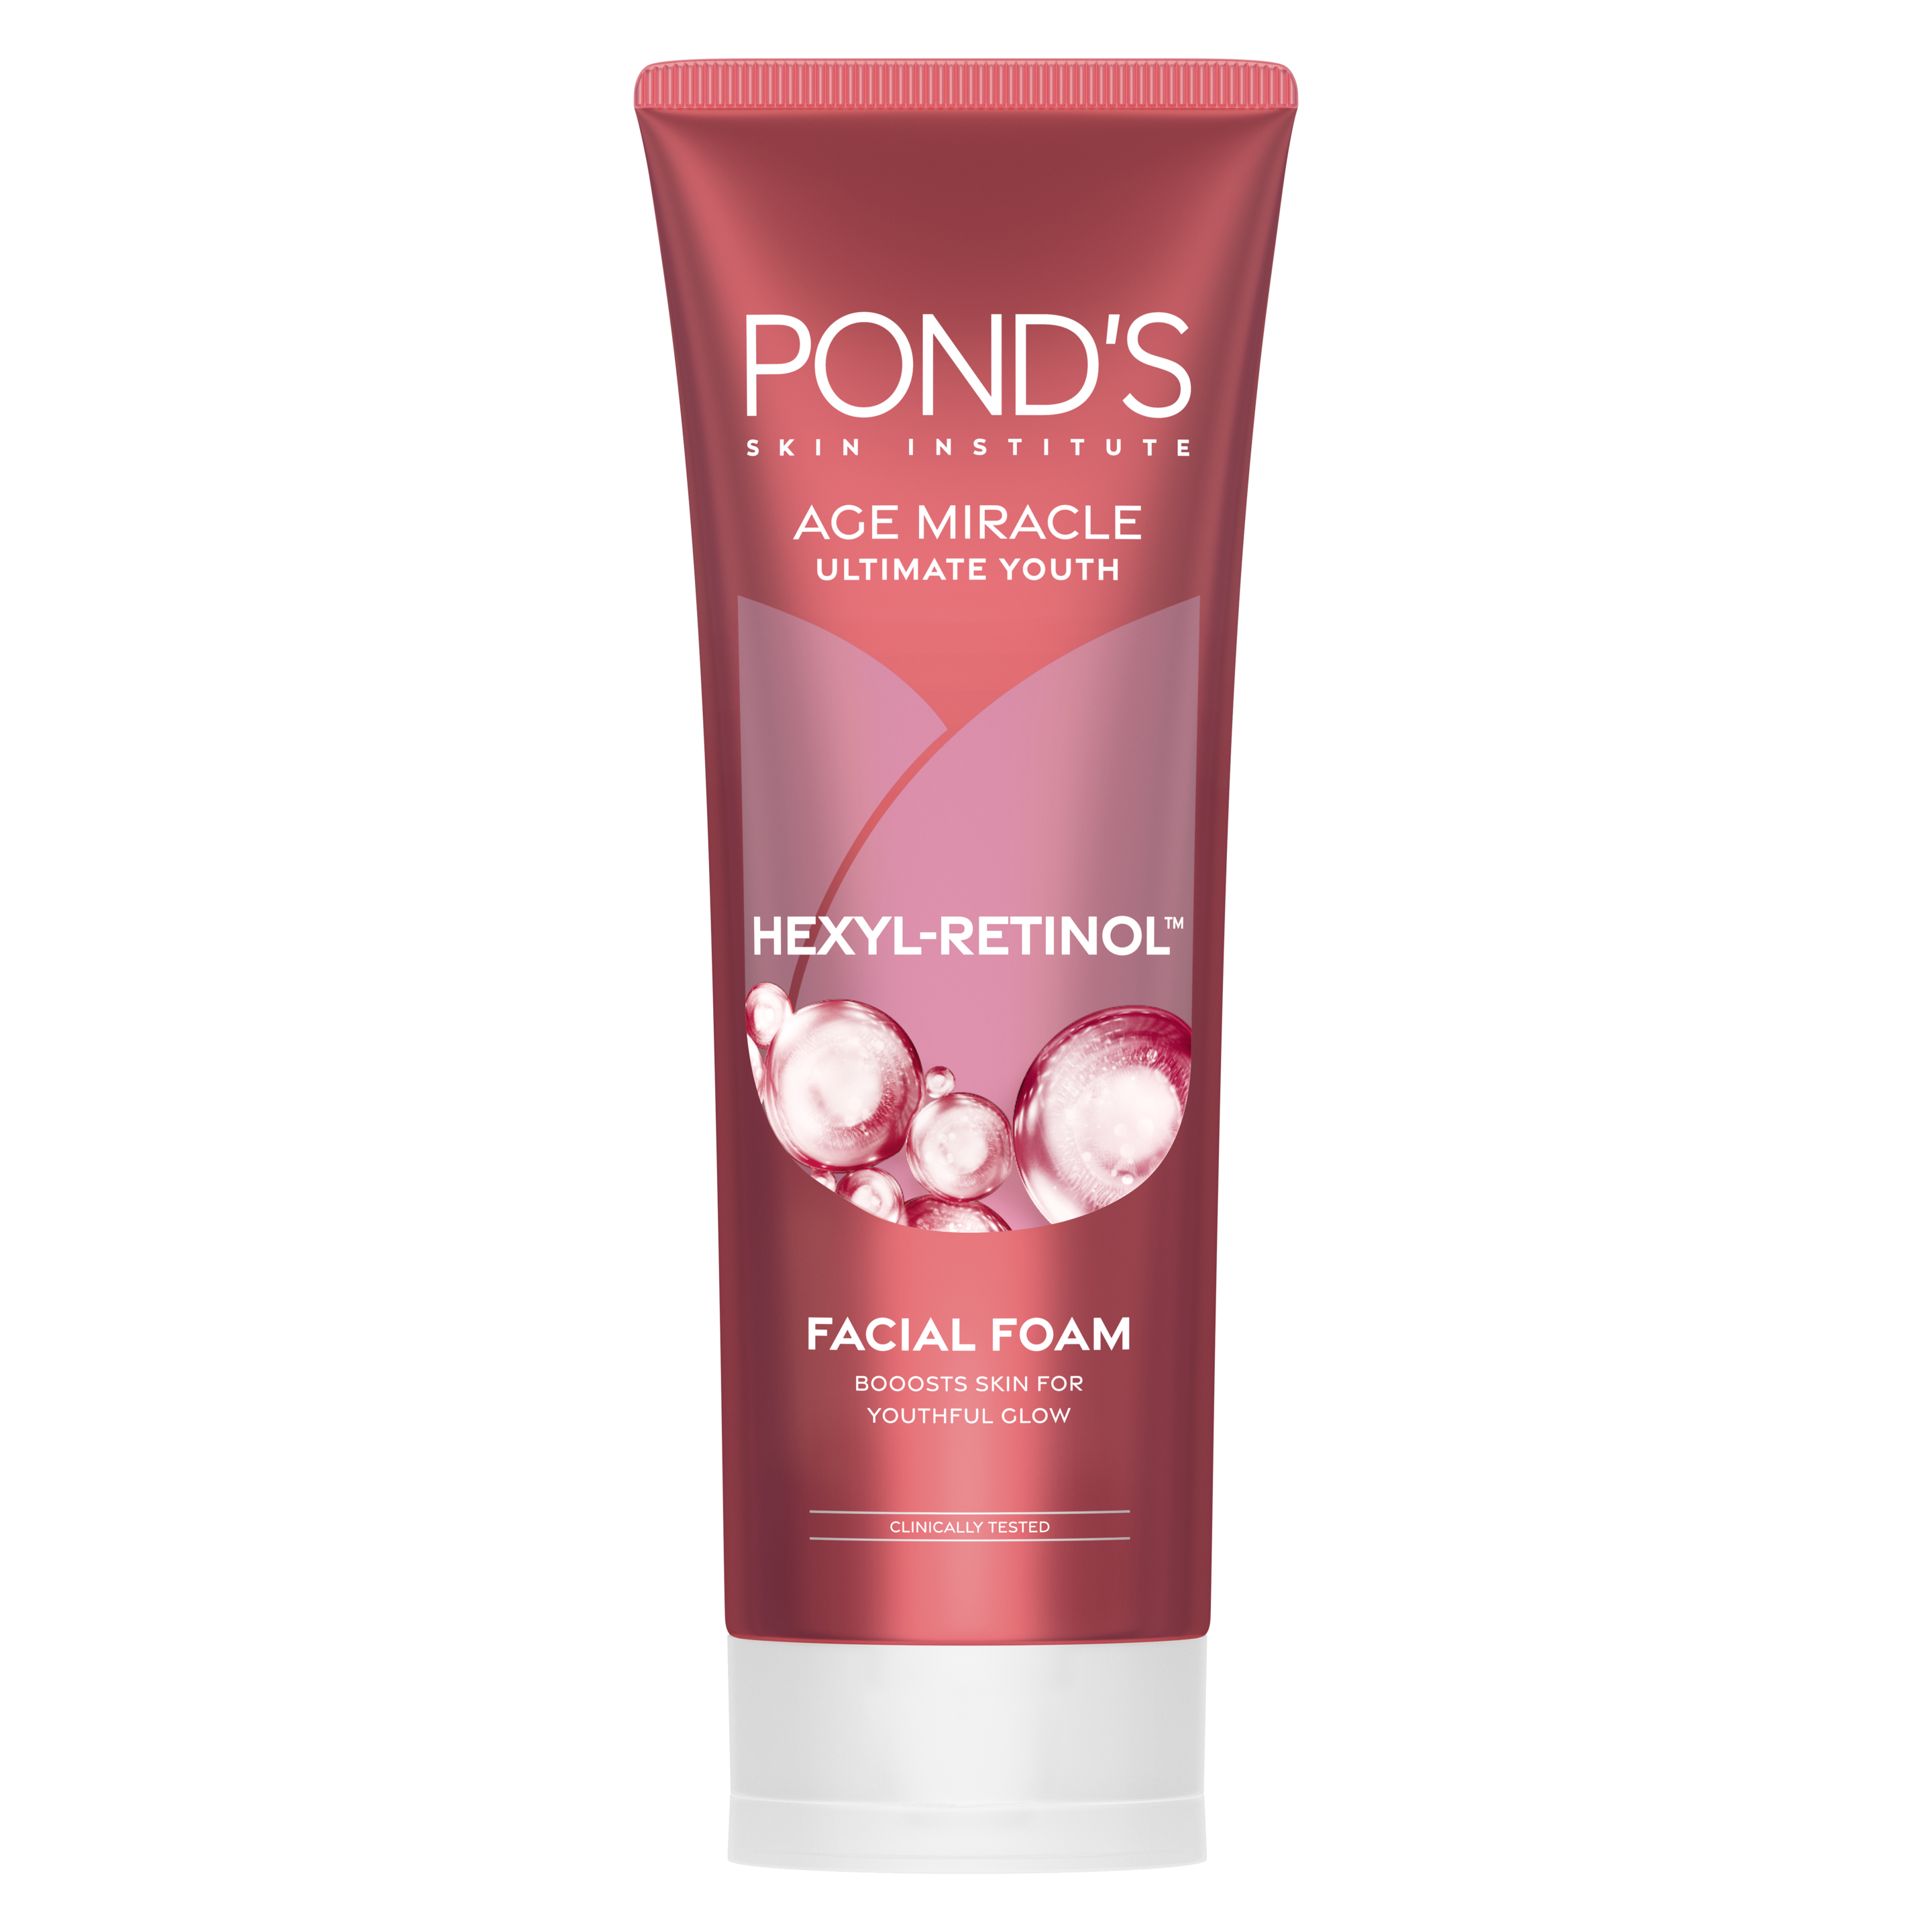 Pond's Age Miracle Ultimate Youth Facial Foam